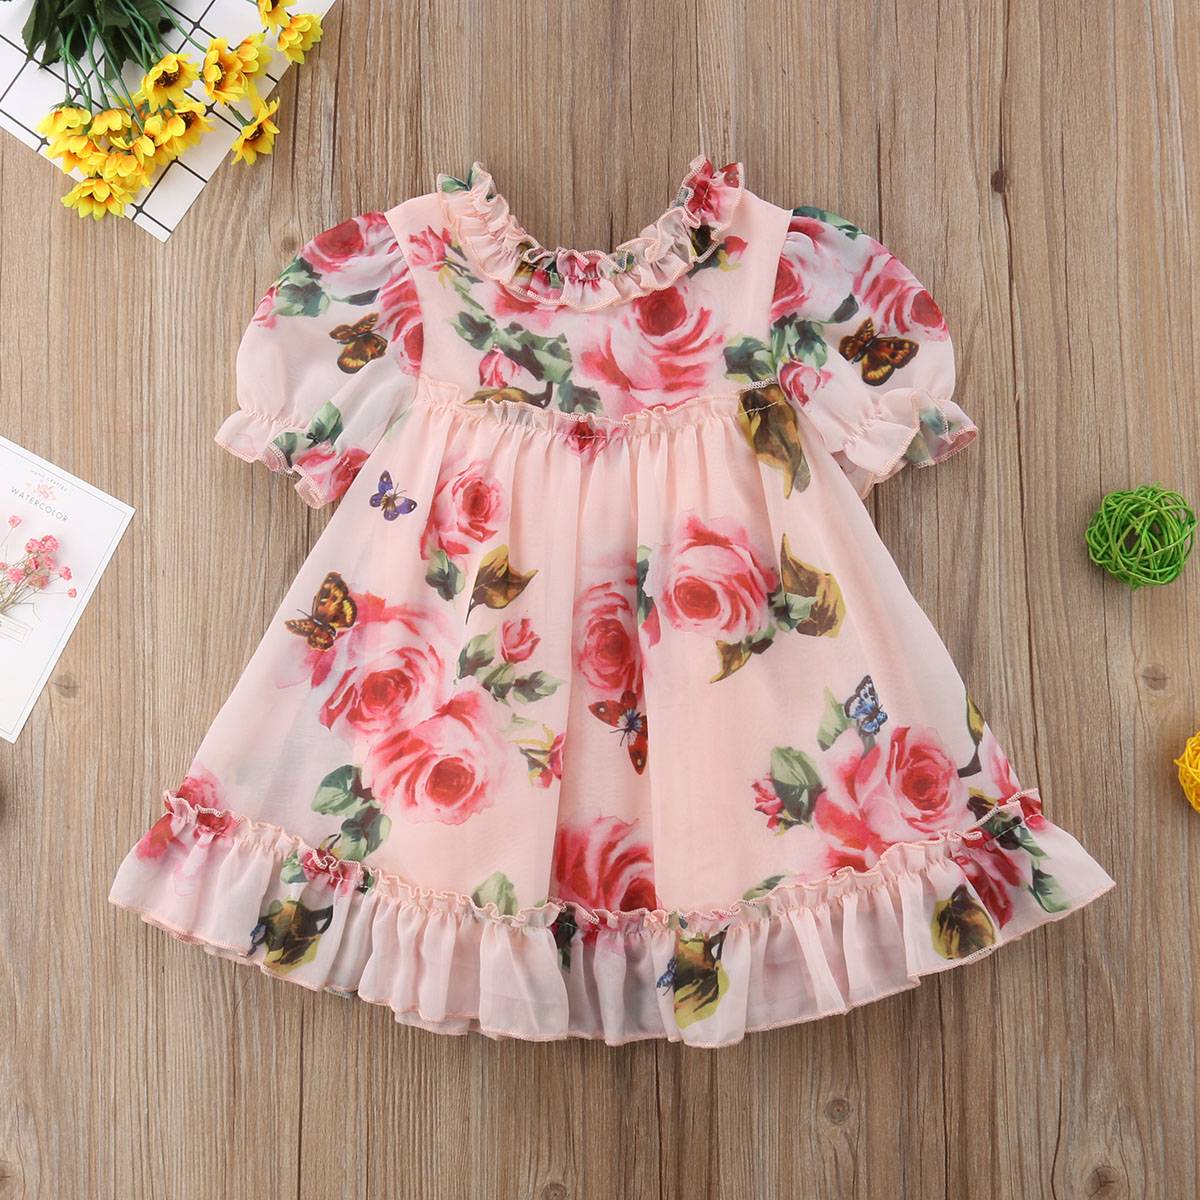 Baby Girl's Fancy Floral Print Party Dress Kid Size : 12M|24M|5T|3T|4T 